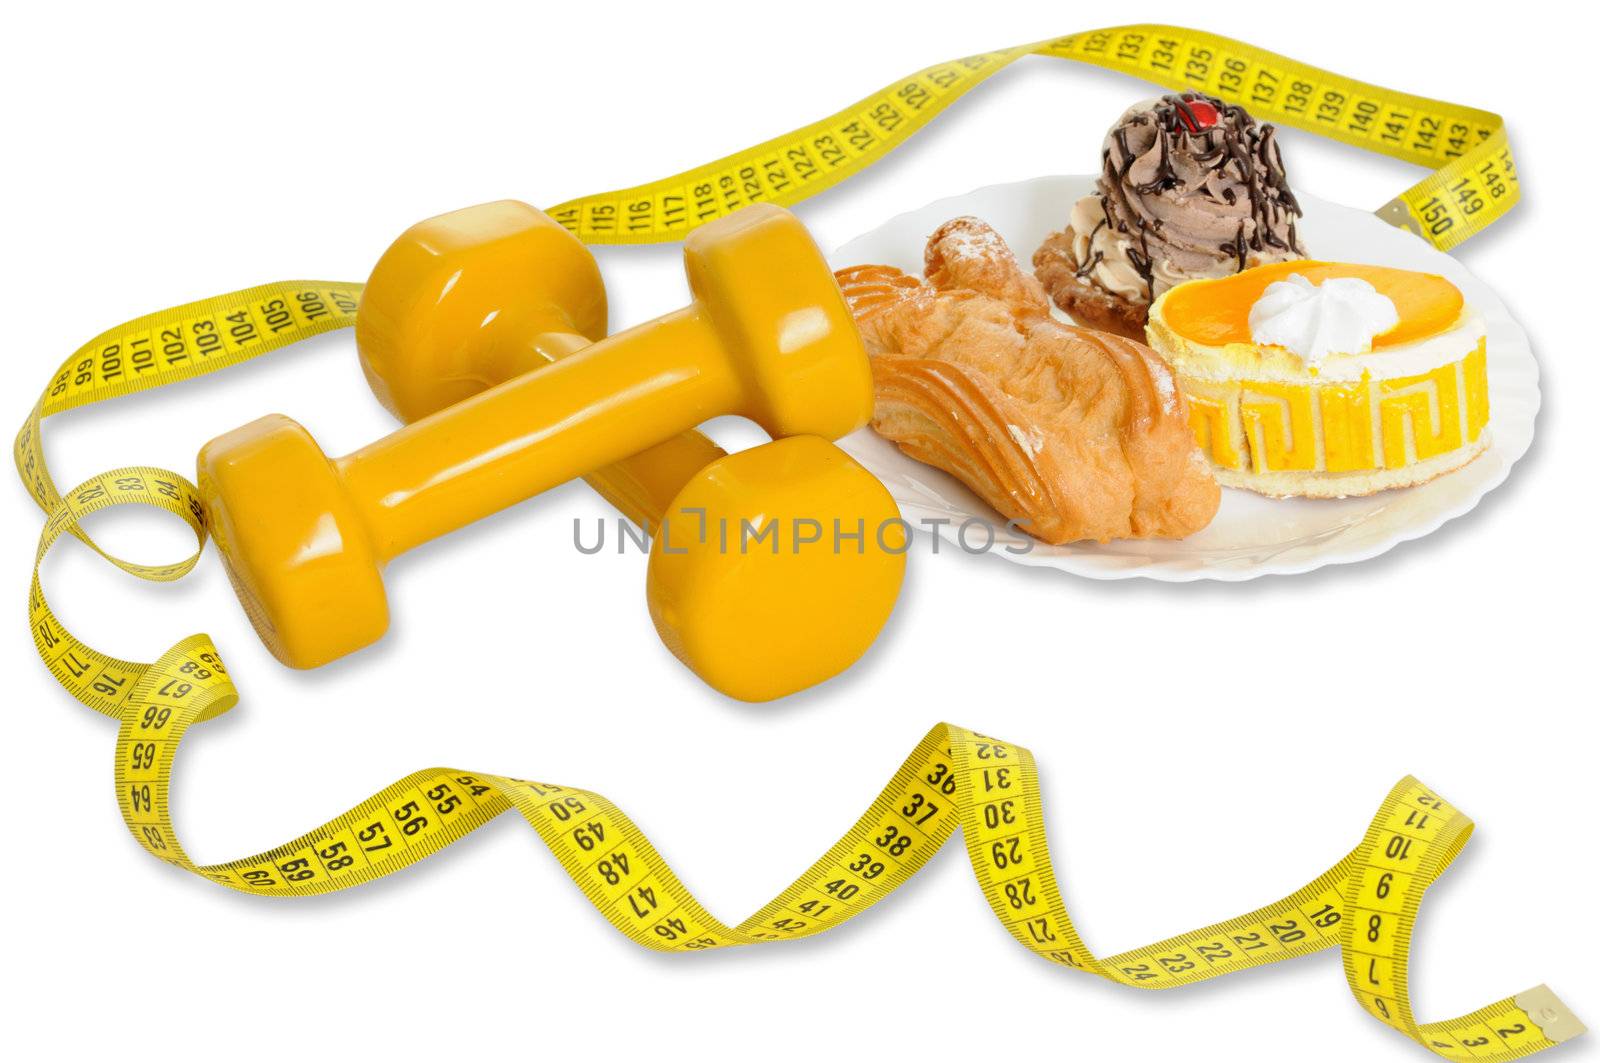 tape measure,cakes and dumbbells isolated on white background